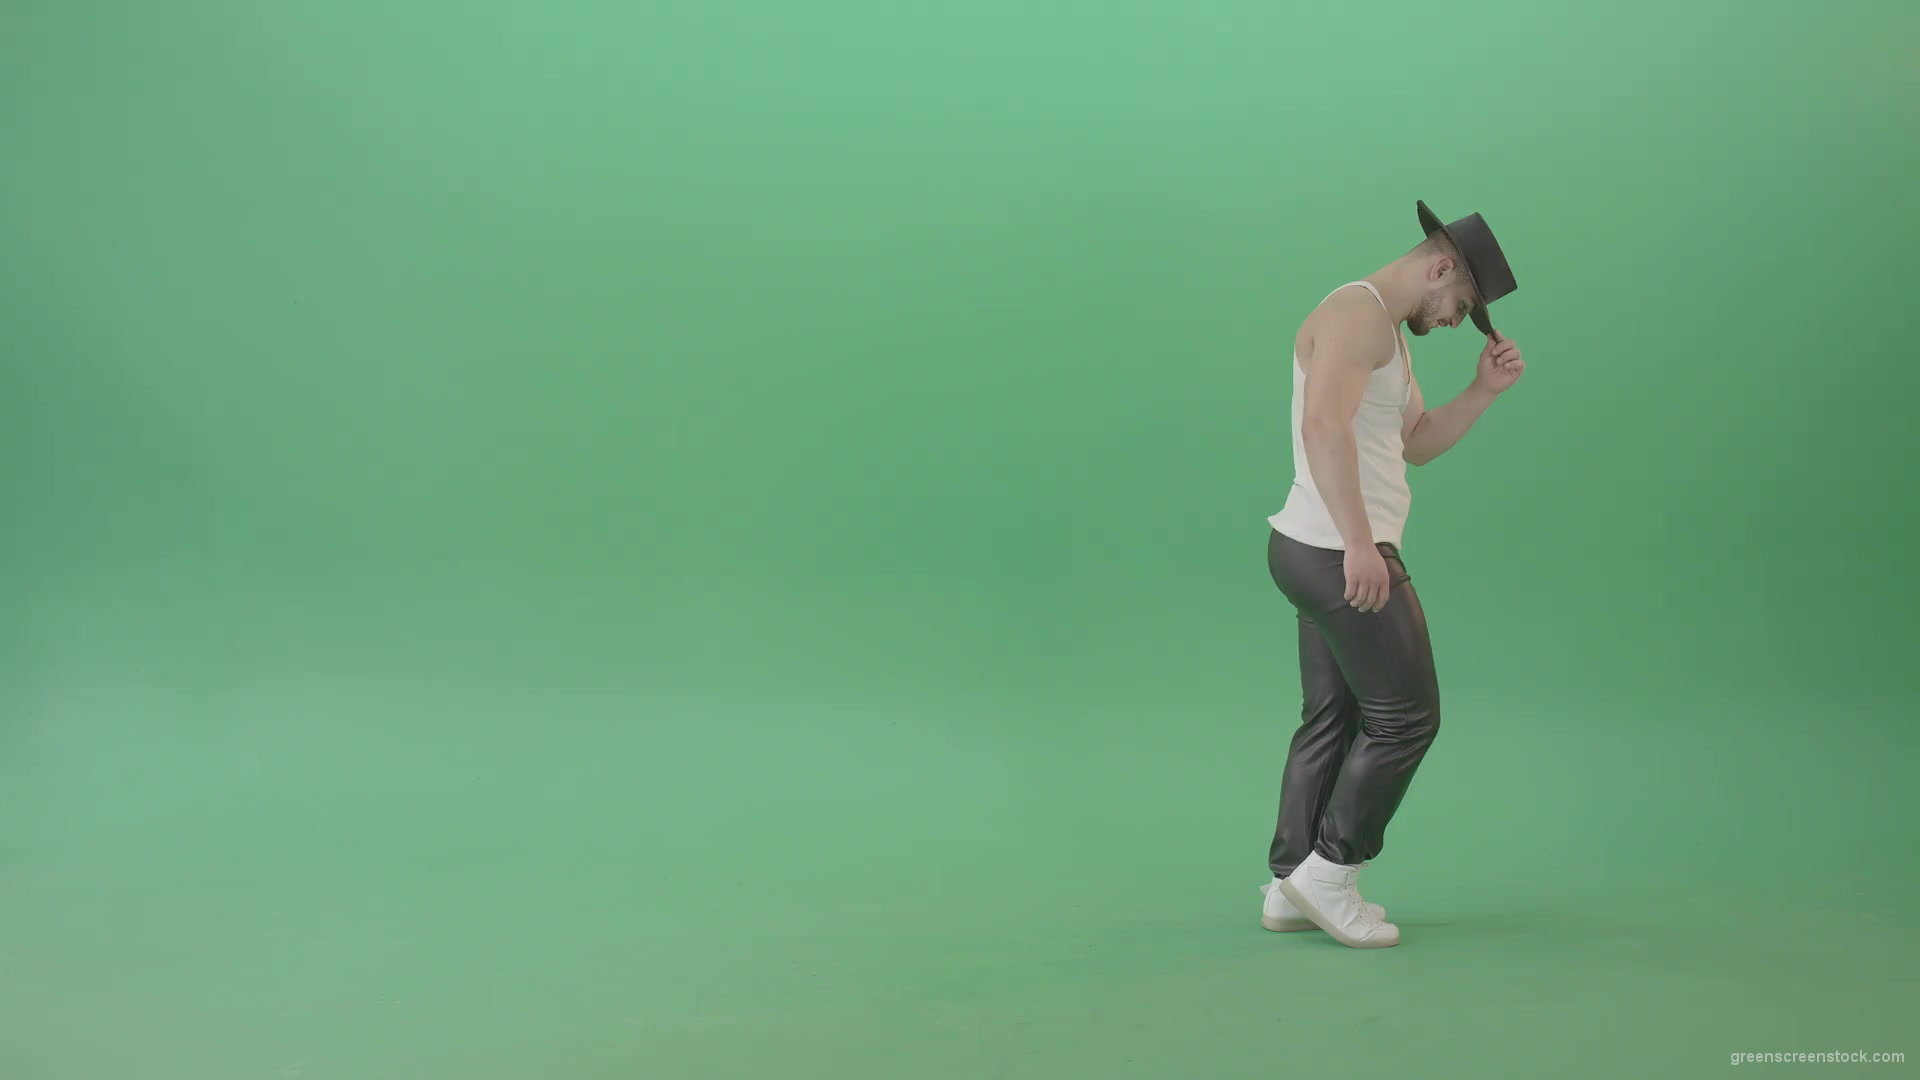 Adult-Man-makes-moonwalk-and-dancing-Pop-isolated-on-Green-Screen-4K-Video-Footage-1920_001 Green Screen Stock